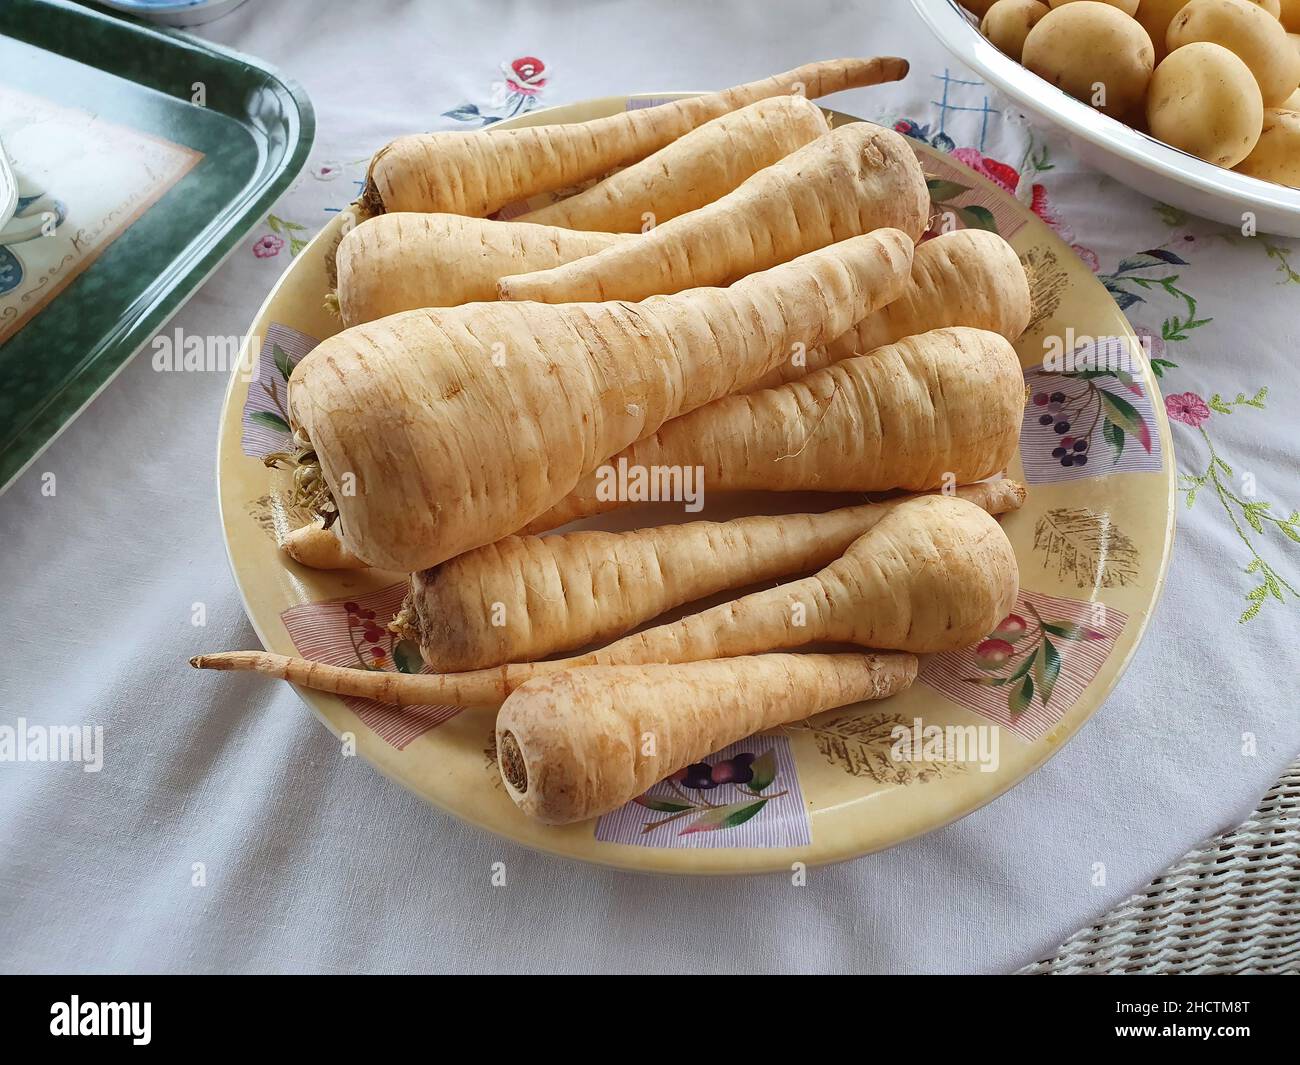 Parsnips on a table background often served roasted with dinner during the festive season of Christmas and Thanksgiving for its nutrition health benef Stock Photo